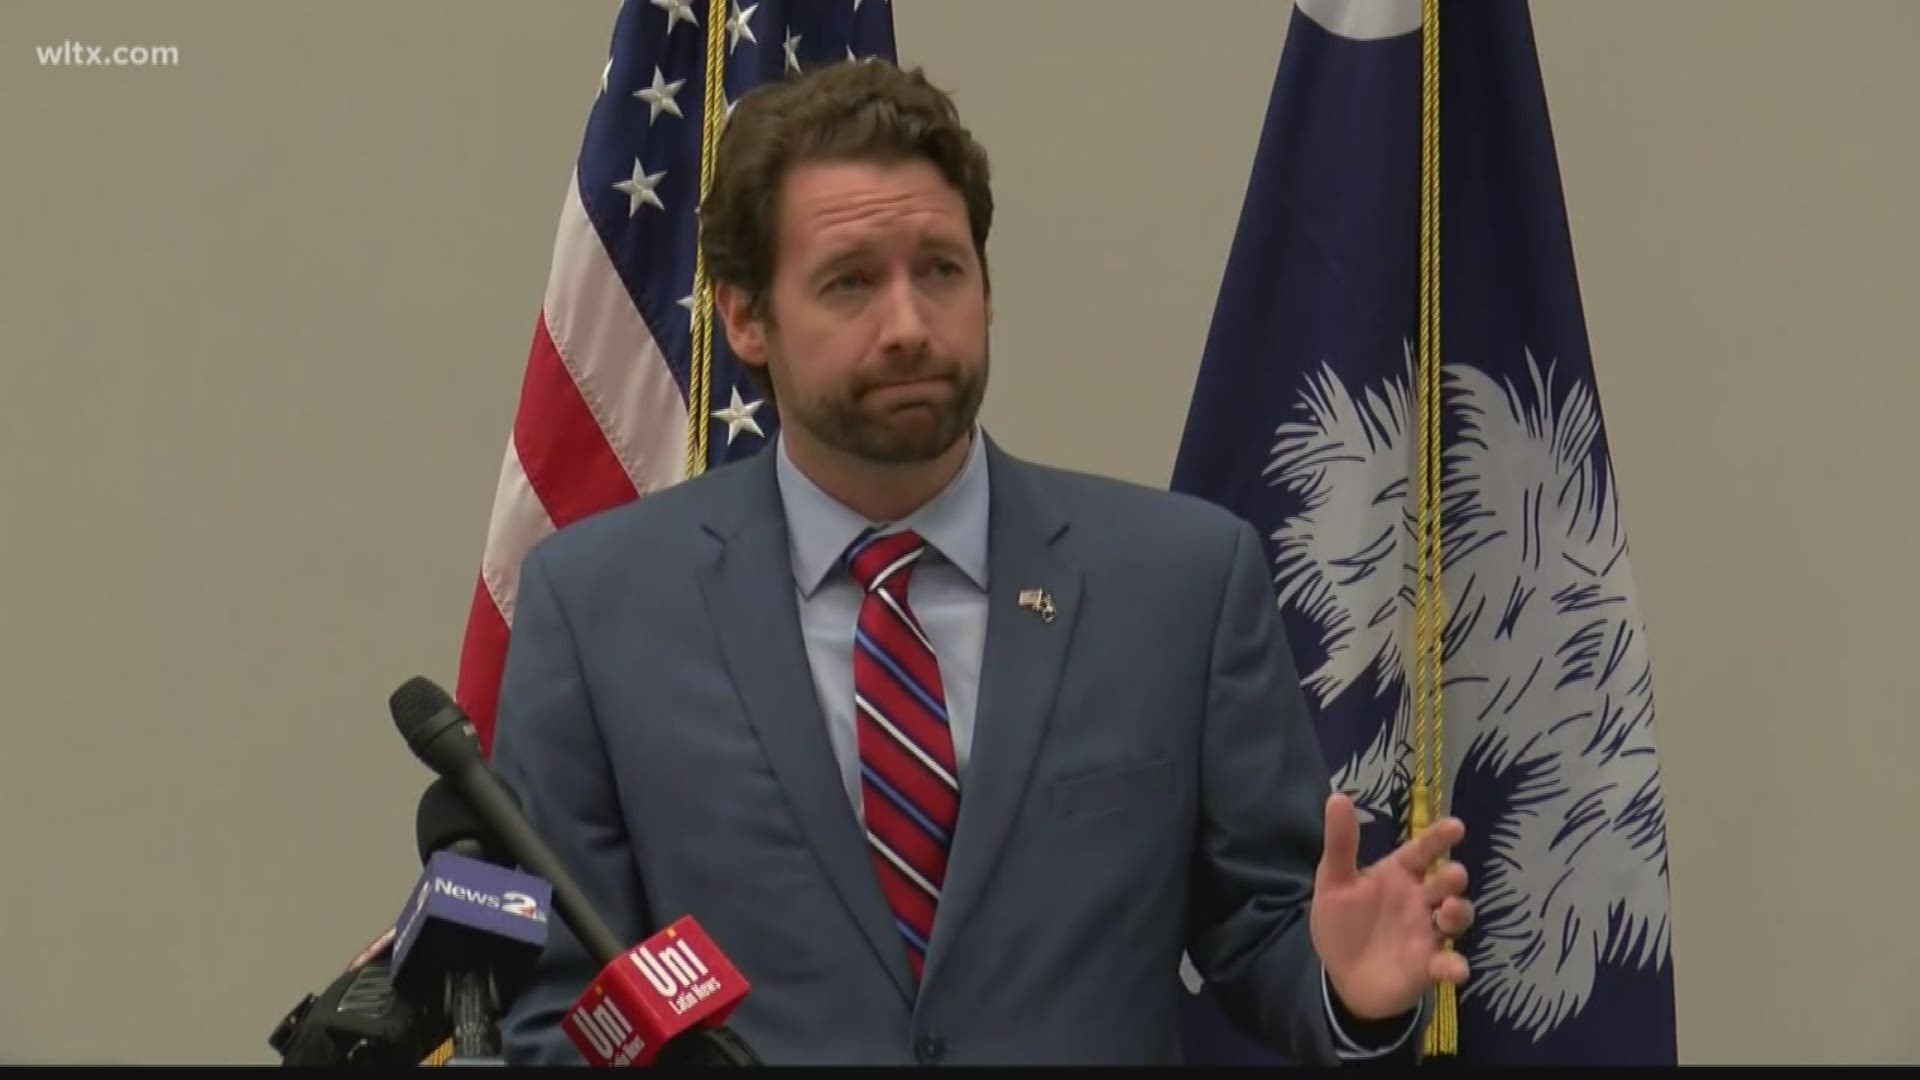 In making the announcement, Cunningham said no person is above the law, and that the president needs to be held accountable if he violated the Constitution.